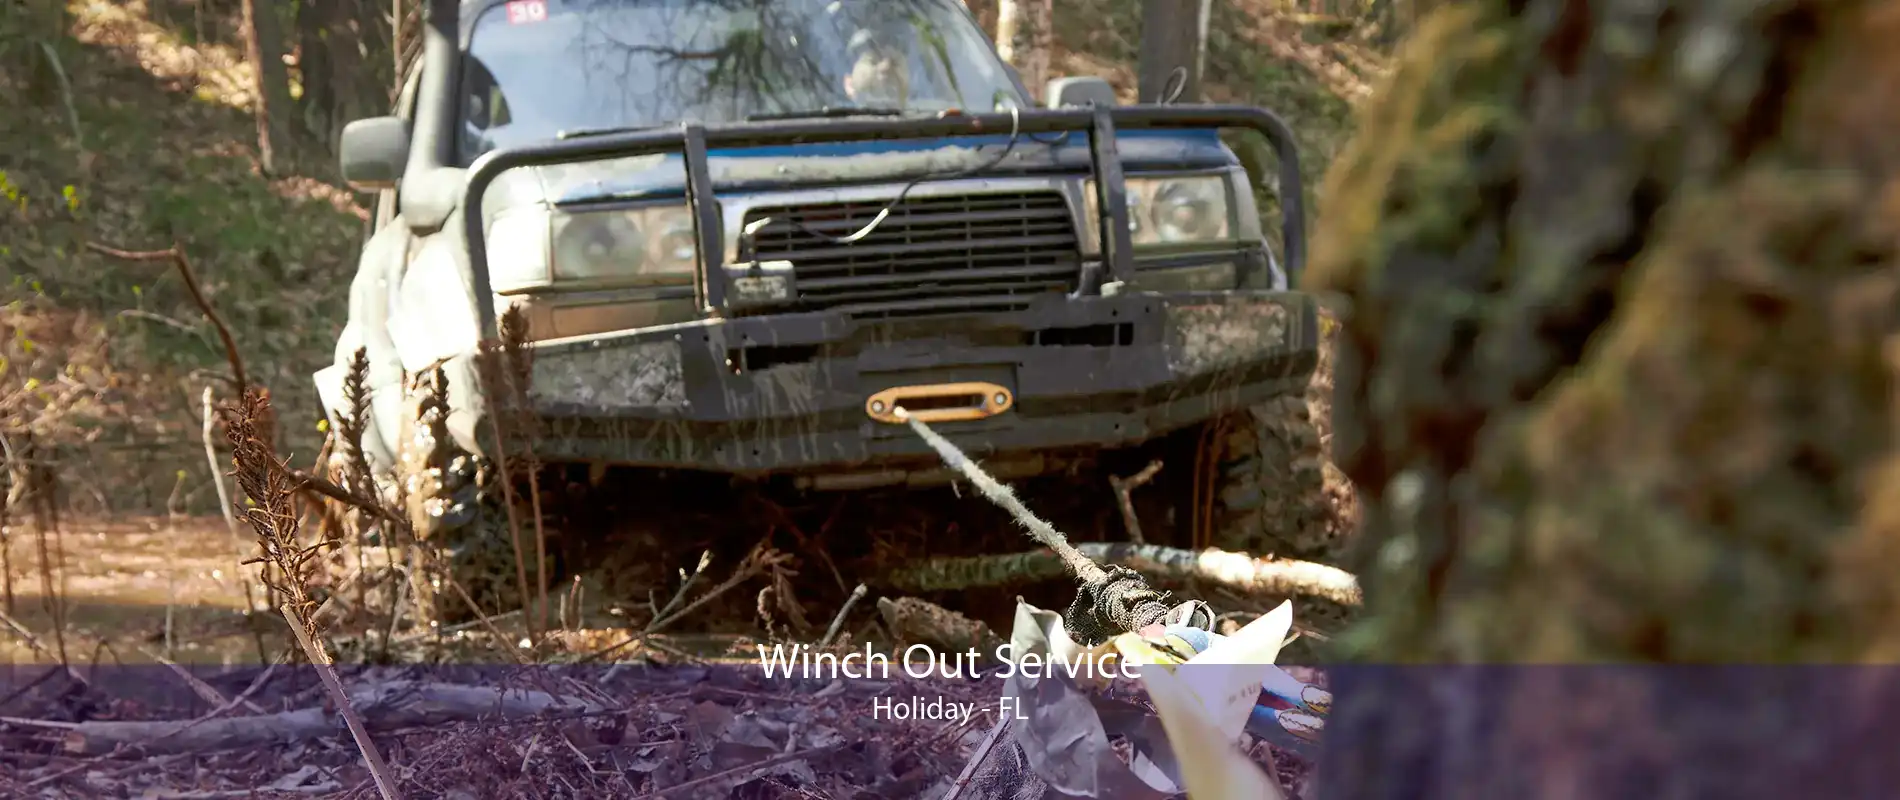 Winch Out Service Holiday - FL